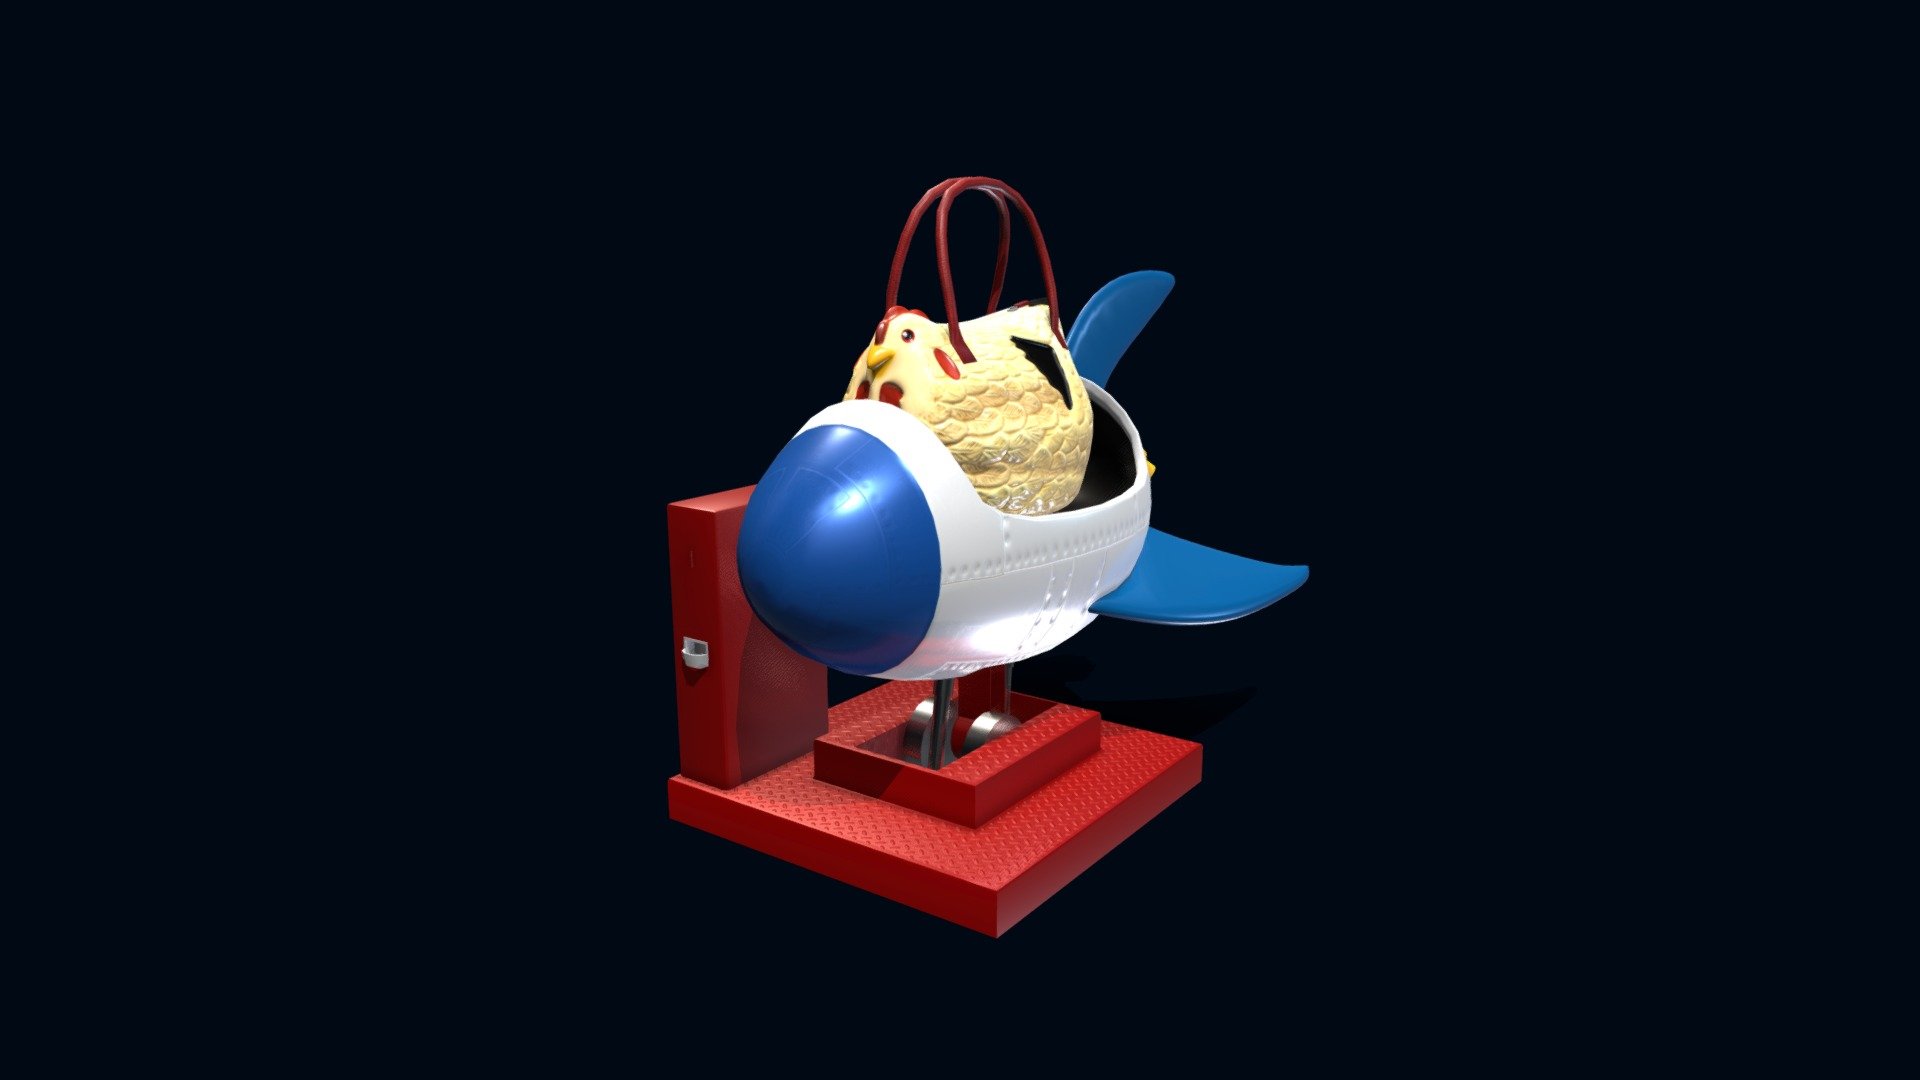 This is Nuggets the chicken purse on his crocket shaped carousel ride.

Nuggets is a chicken purse but he is also so much more than that… 
it’s the sidekick of the amazing singer/song writer Sara Niemietz and 
a season world traveler and boy, are his wings tired…

when he'll sleep he'll dream of space.

https://youtu.be/xfL-eC1vM3k - Nuggets The Chicken Purse - Nuggets Rocket - 3D model by Frank Rennau (@rennau) 3d model